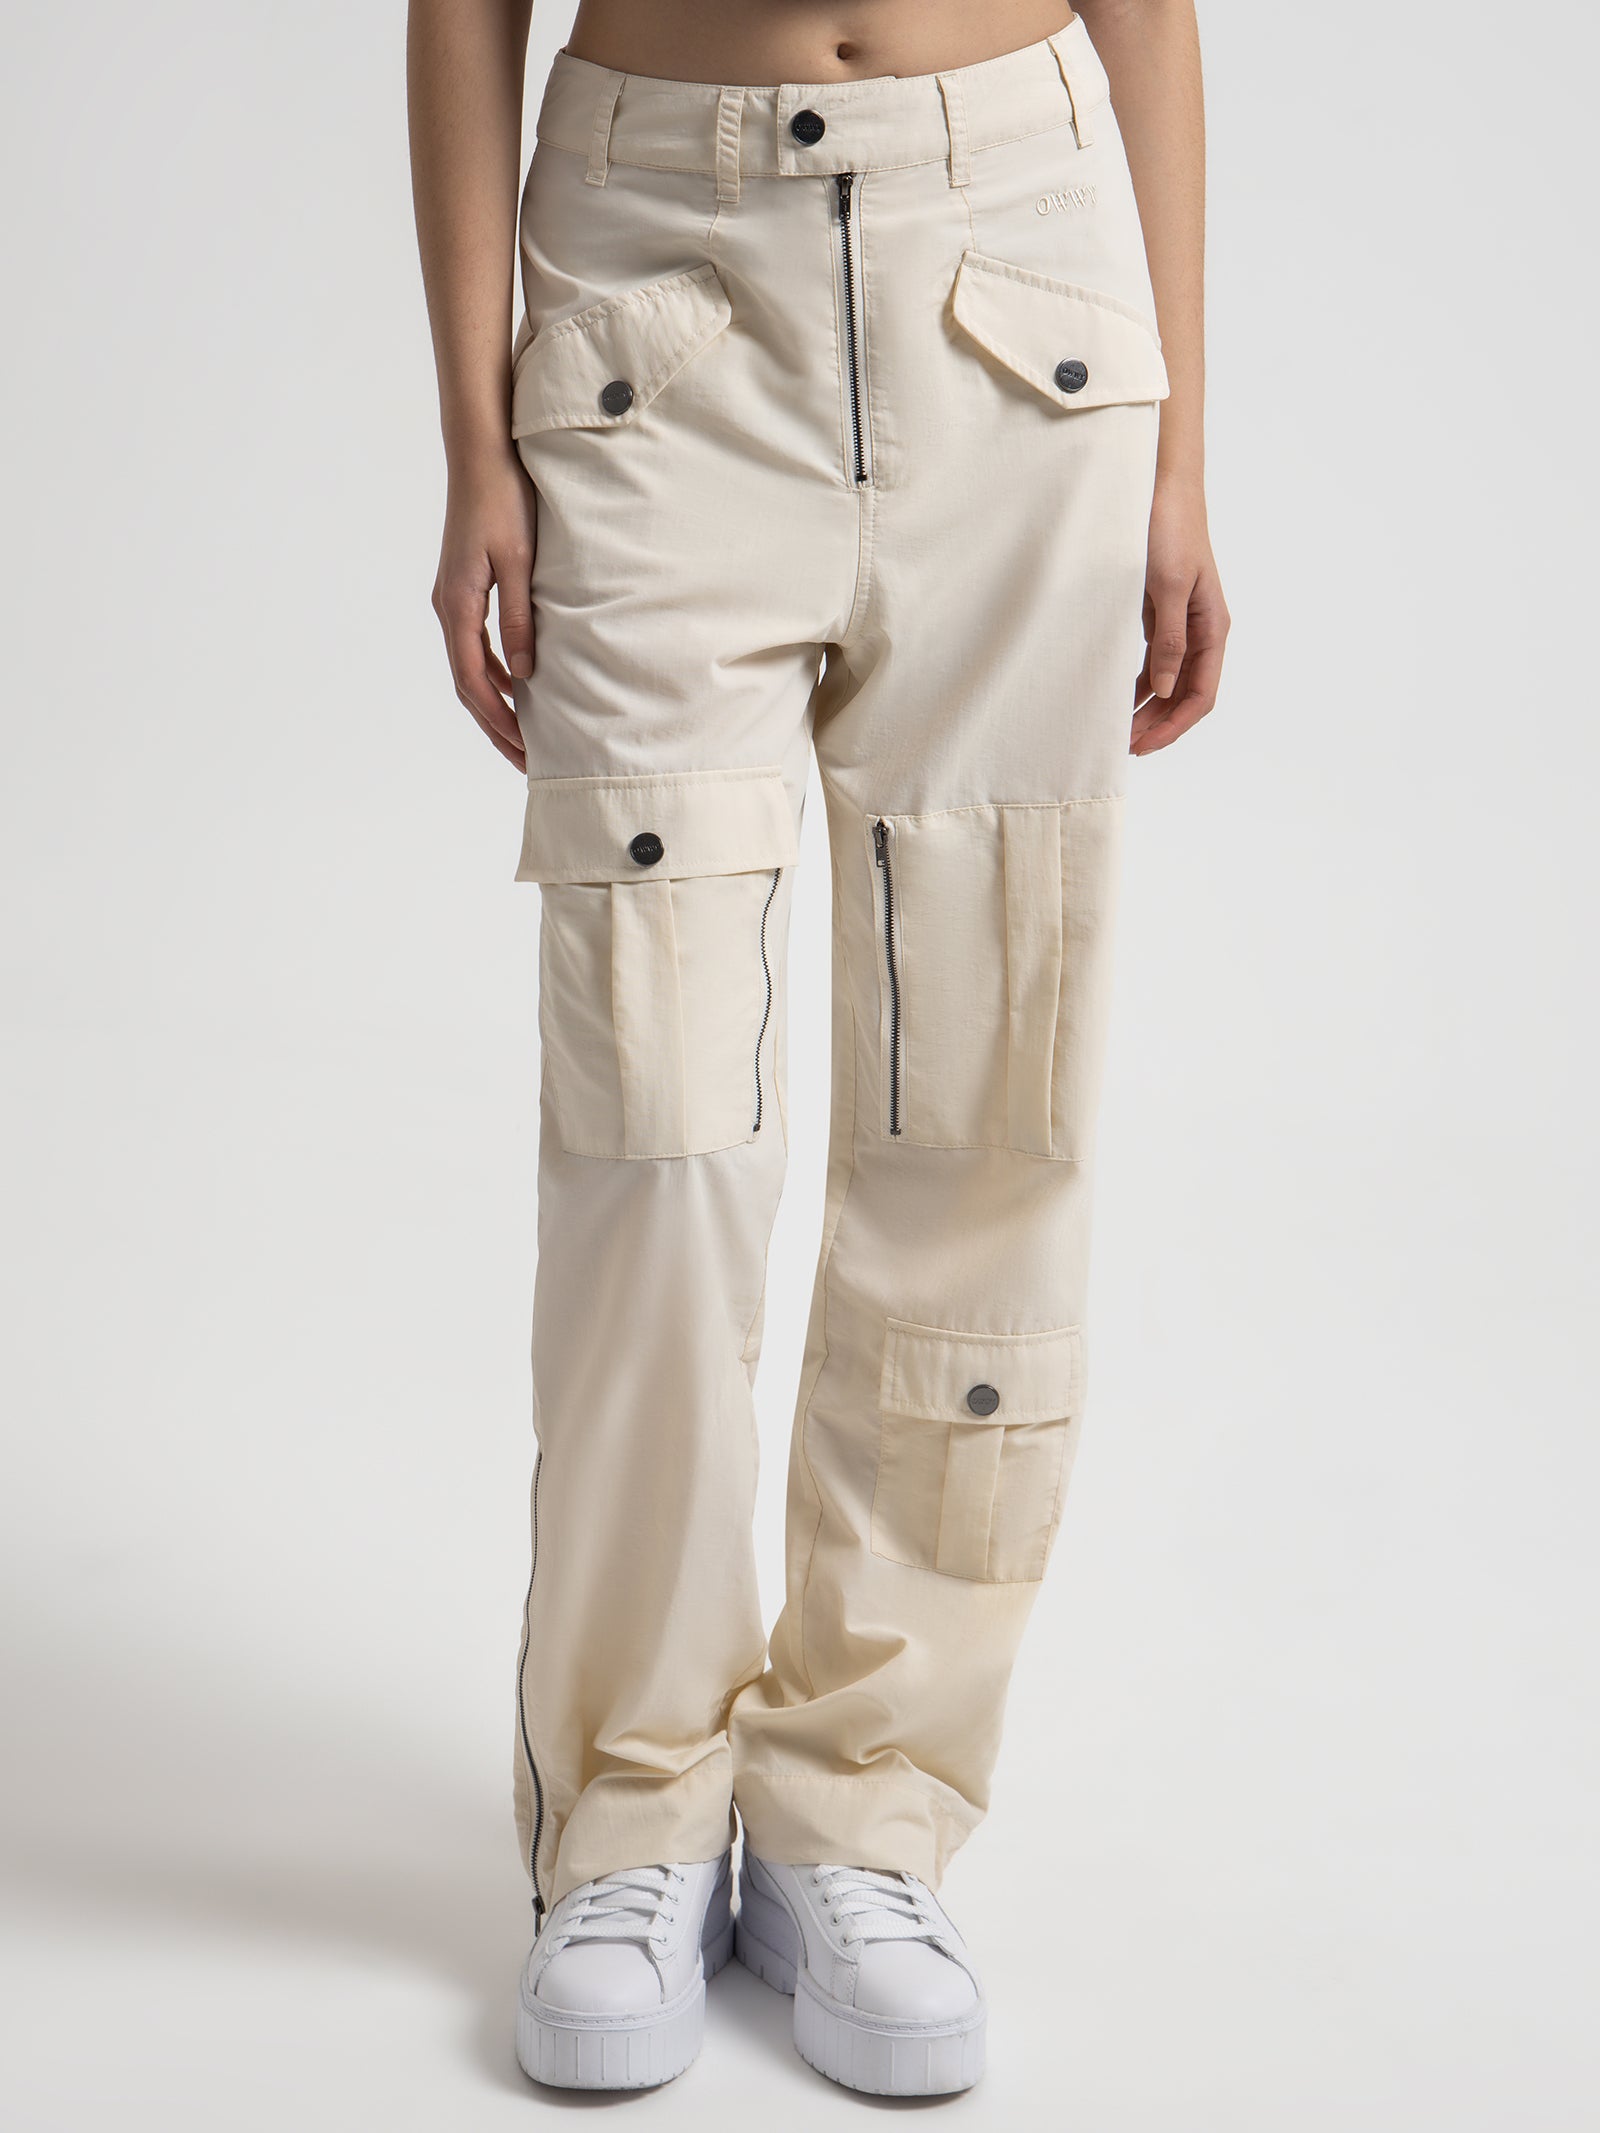 Inux Cargo Pants in Off White - Glue Store